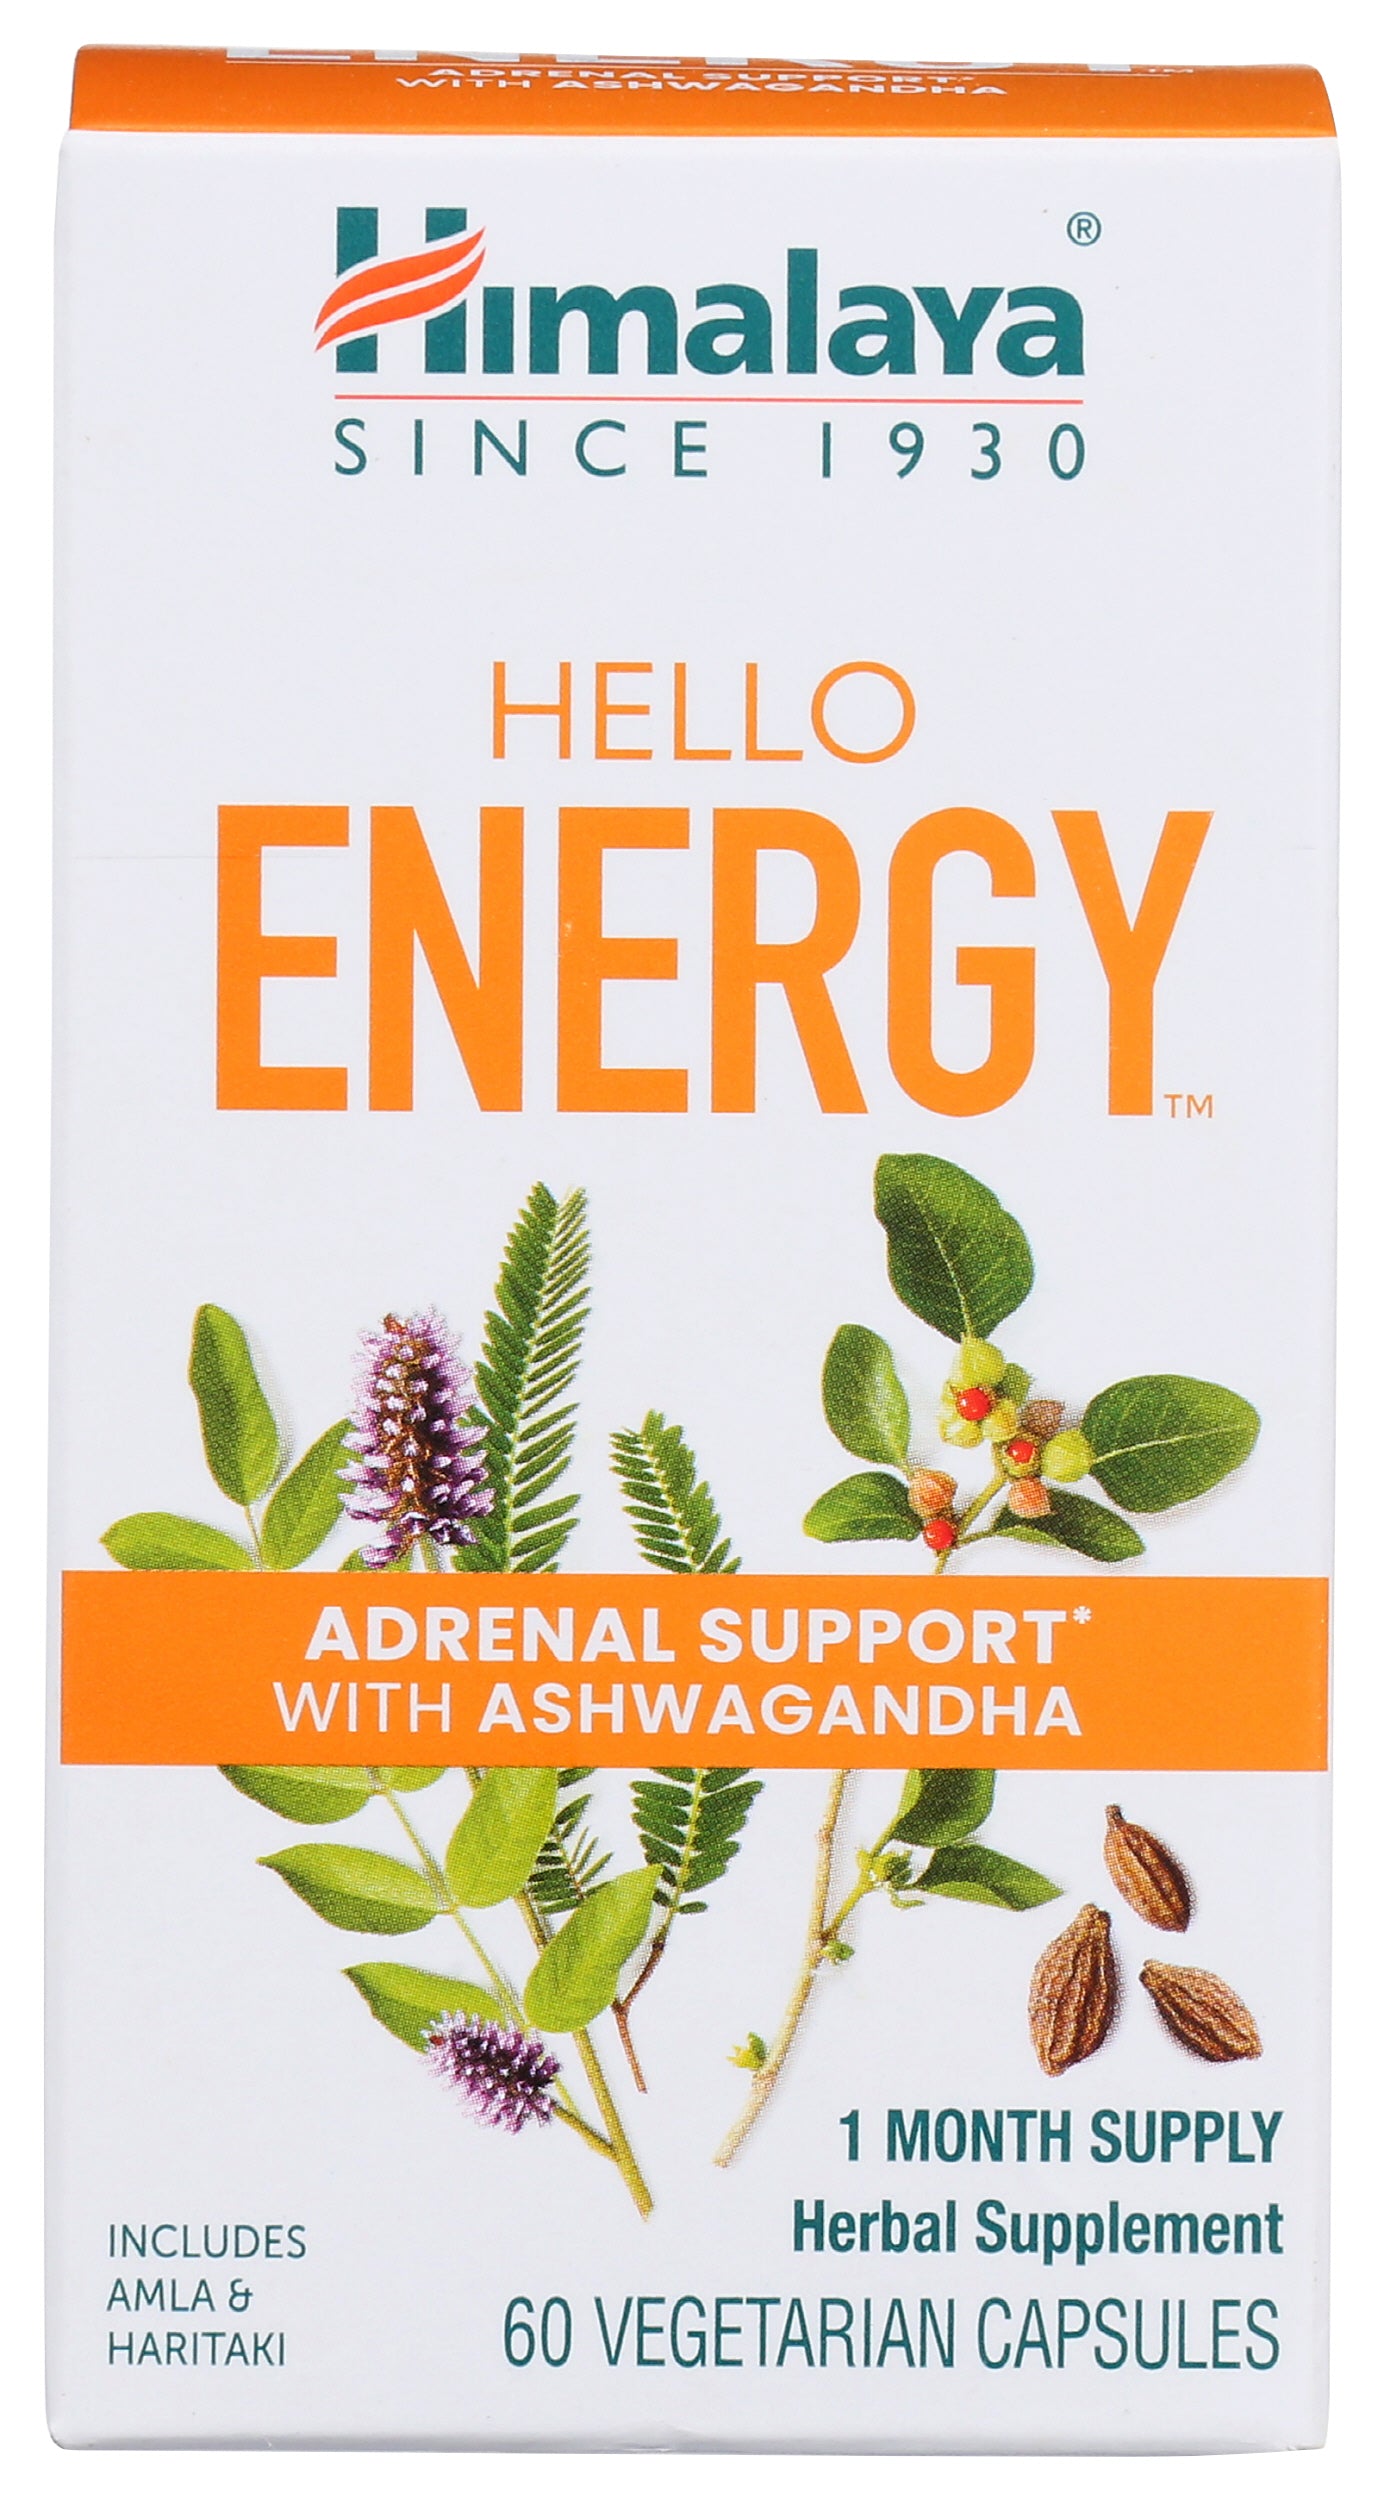 Himalaya Hello Energy Adrenal Support 60 Vegetarian Capsules Front of Box